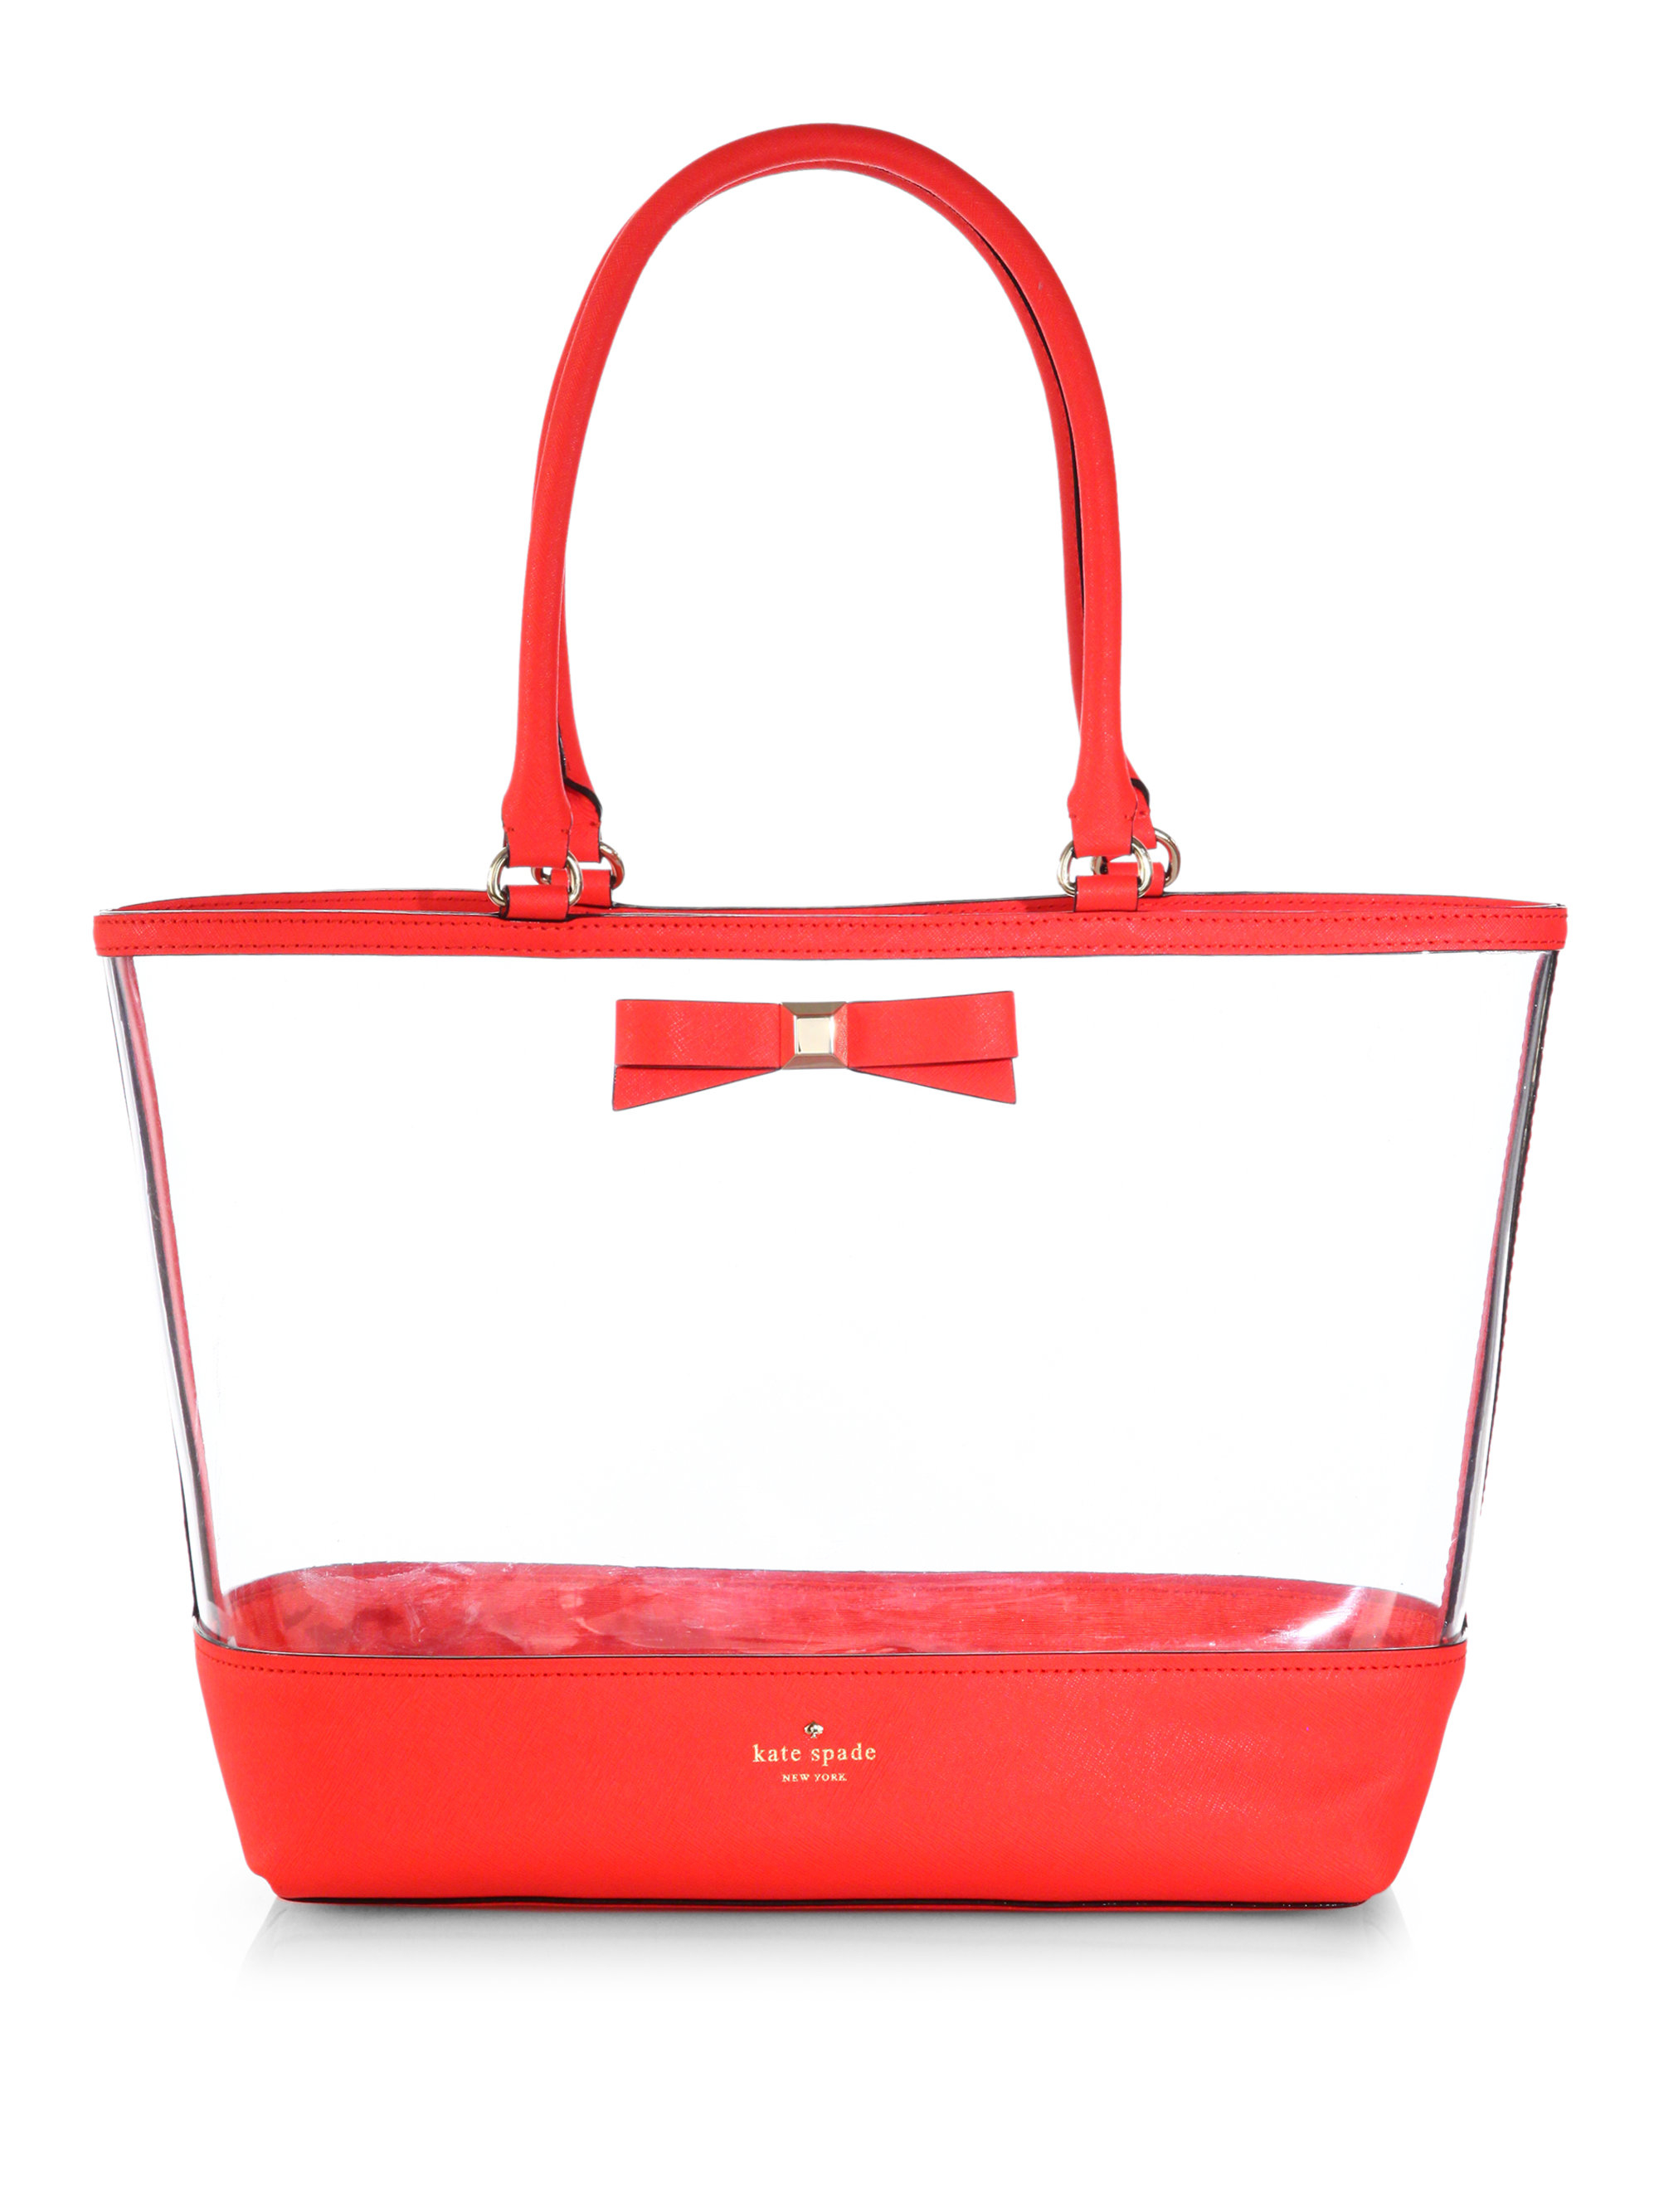 Lids Louisville Cardinals Women's Clear Tote Bag - Red